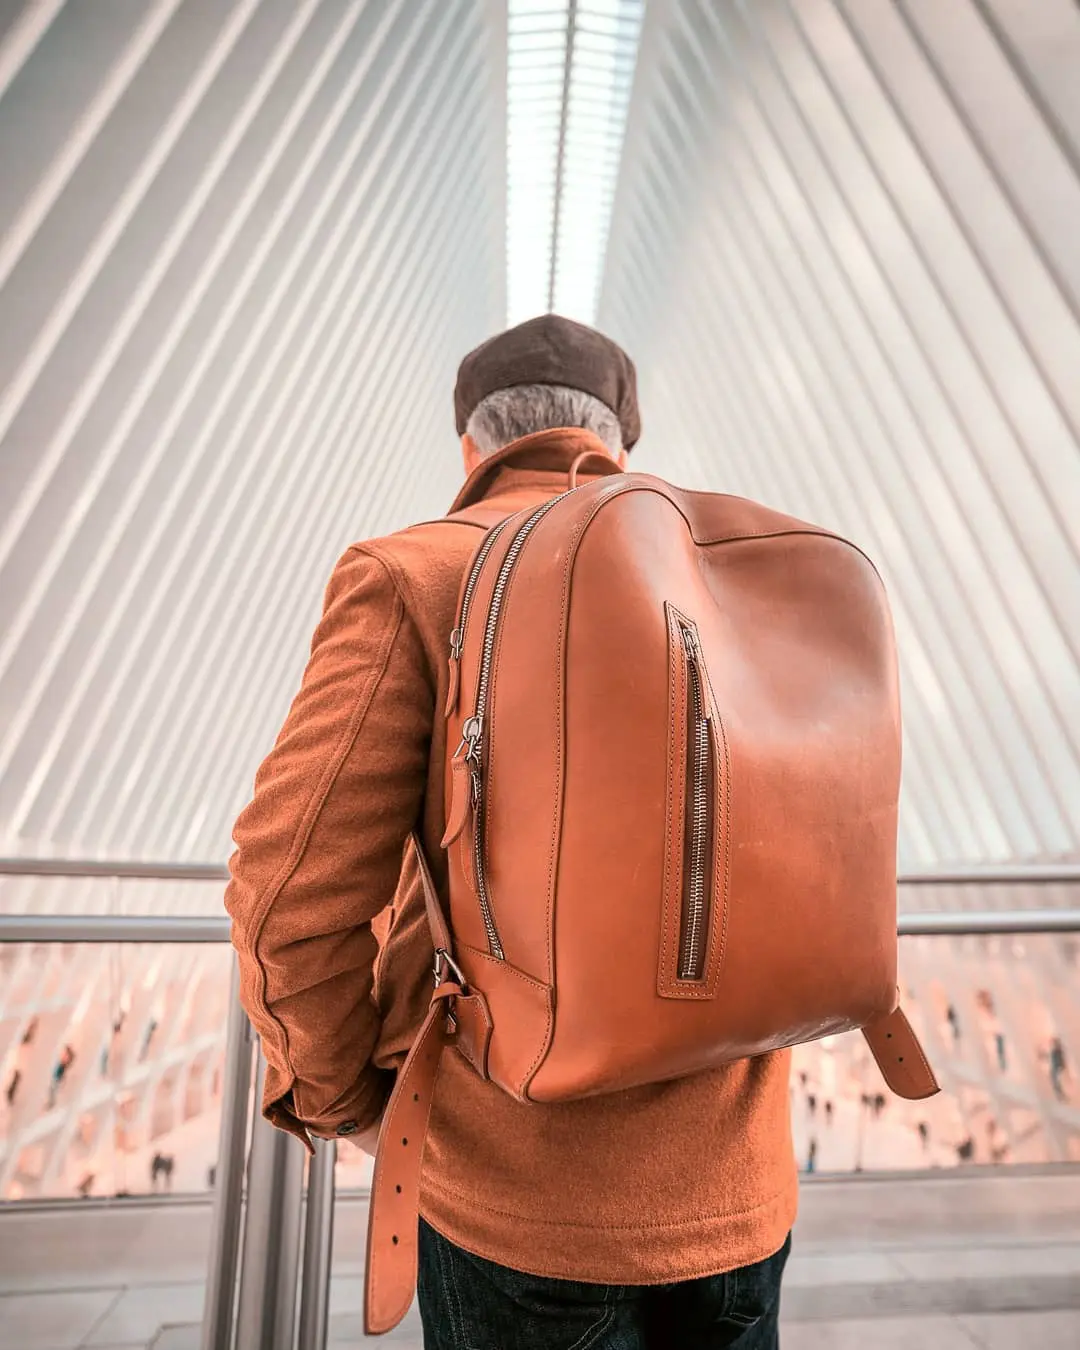 Rugged leather backpack